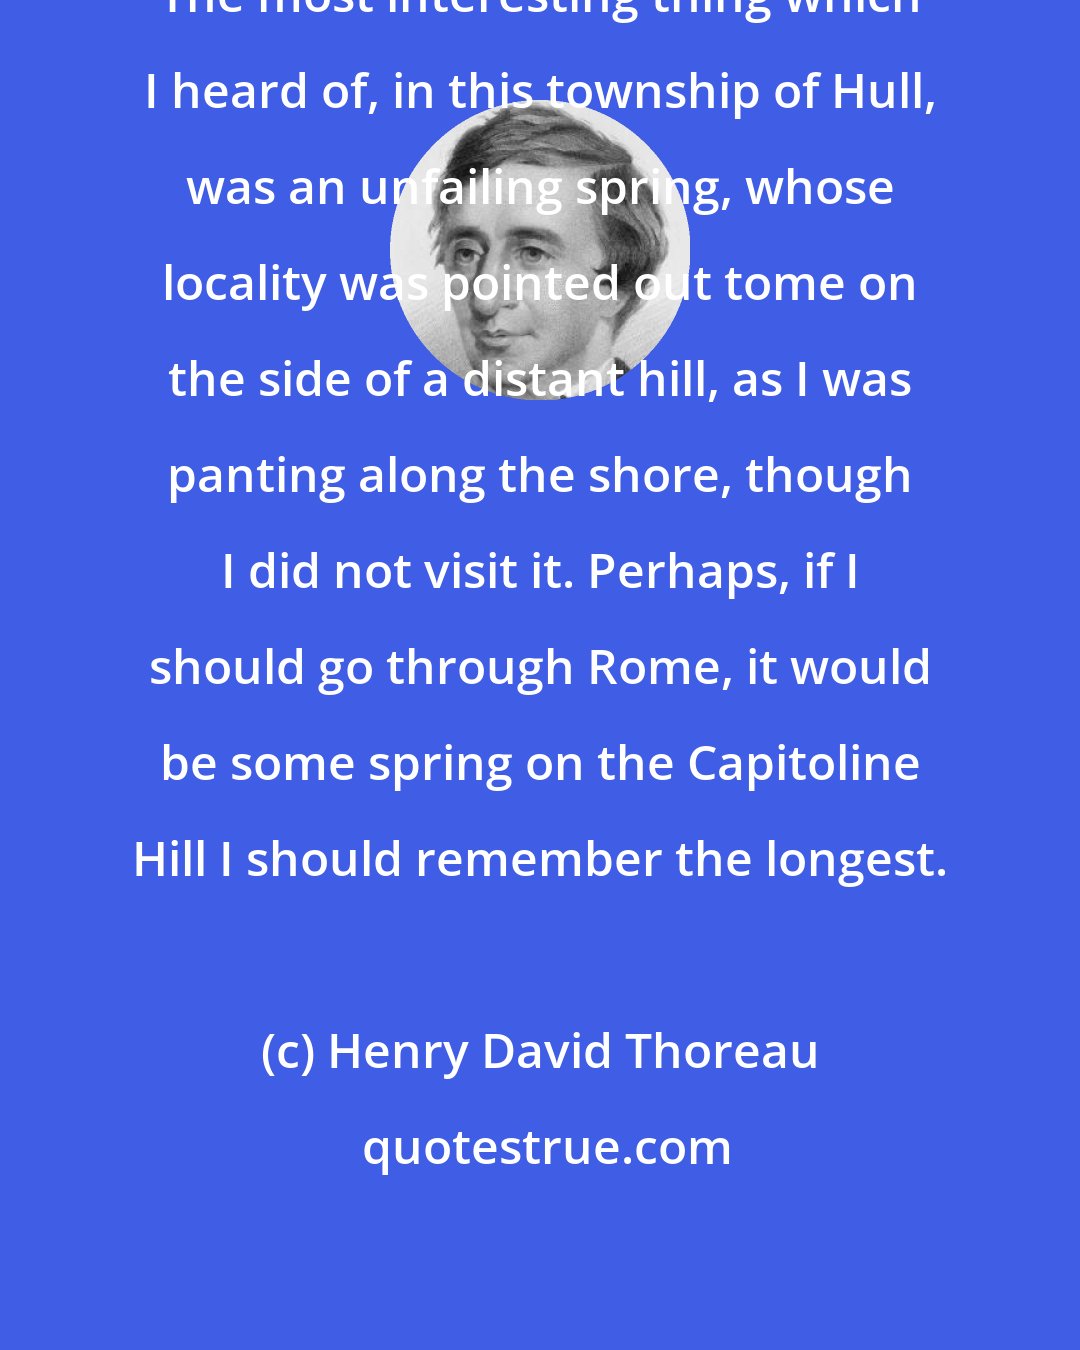 Henry David Thoreau: The most interesting thing which I heard of, in this township of Hull, was an unfailing spring, whose locality was pointed out tome on the side of a distant hill, as I was panting along the shore, though I did not visit it. Perhaps, if I should go through Rome, it would be some spring on the Capitoline Hill I should remember the longest.